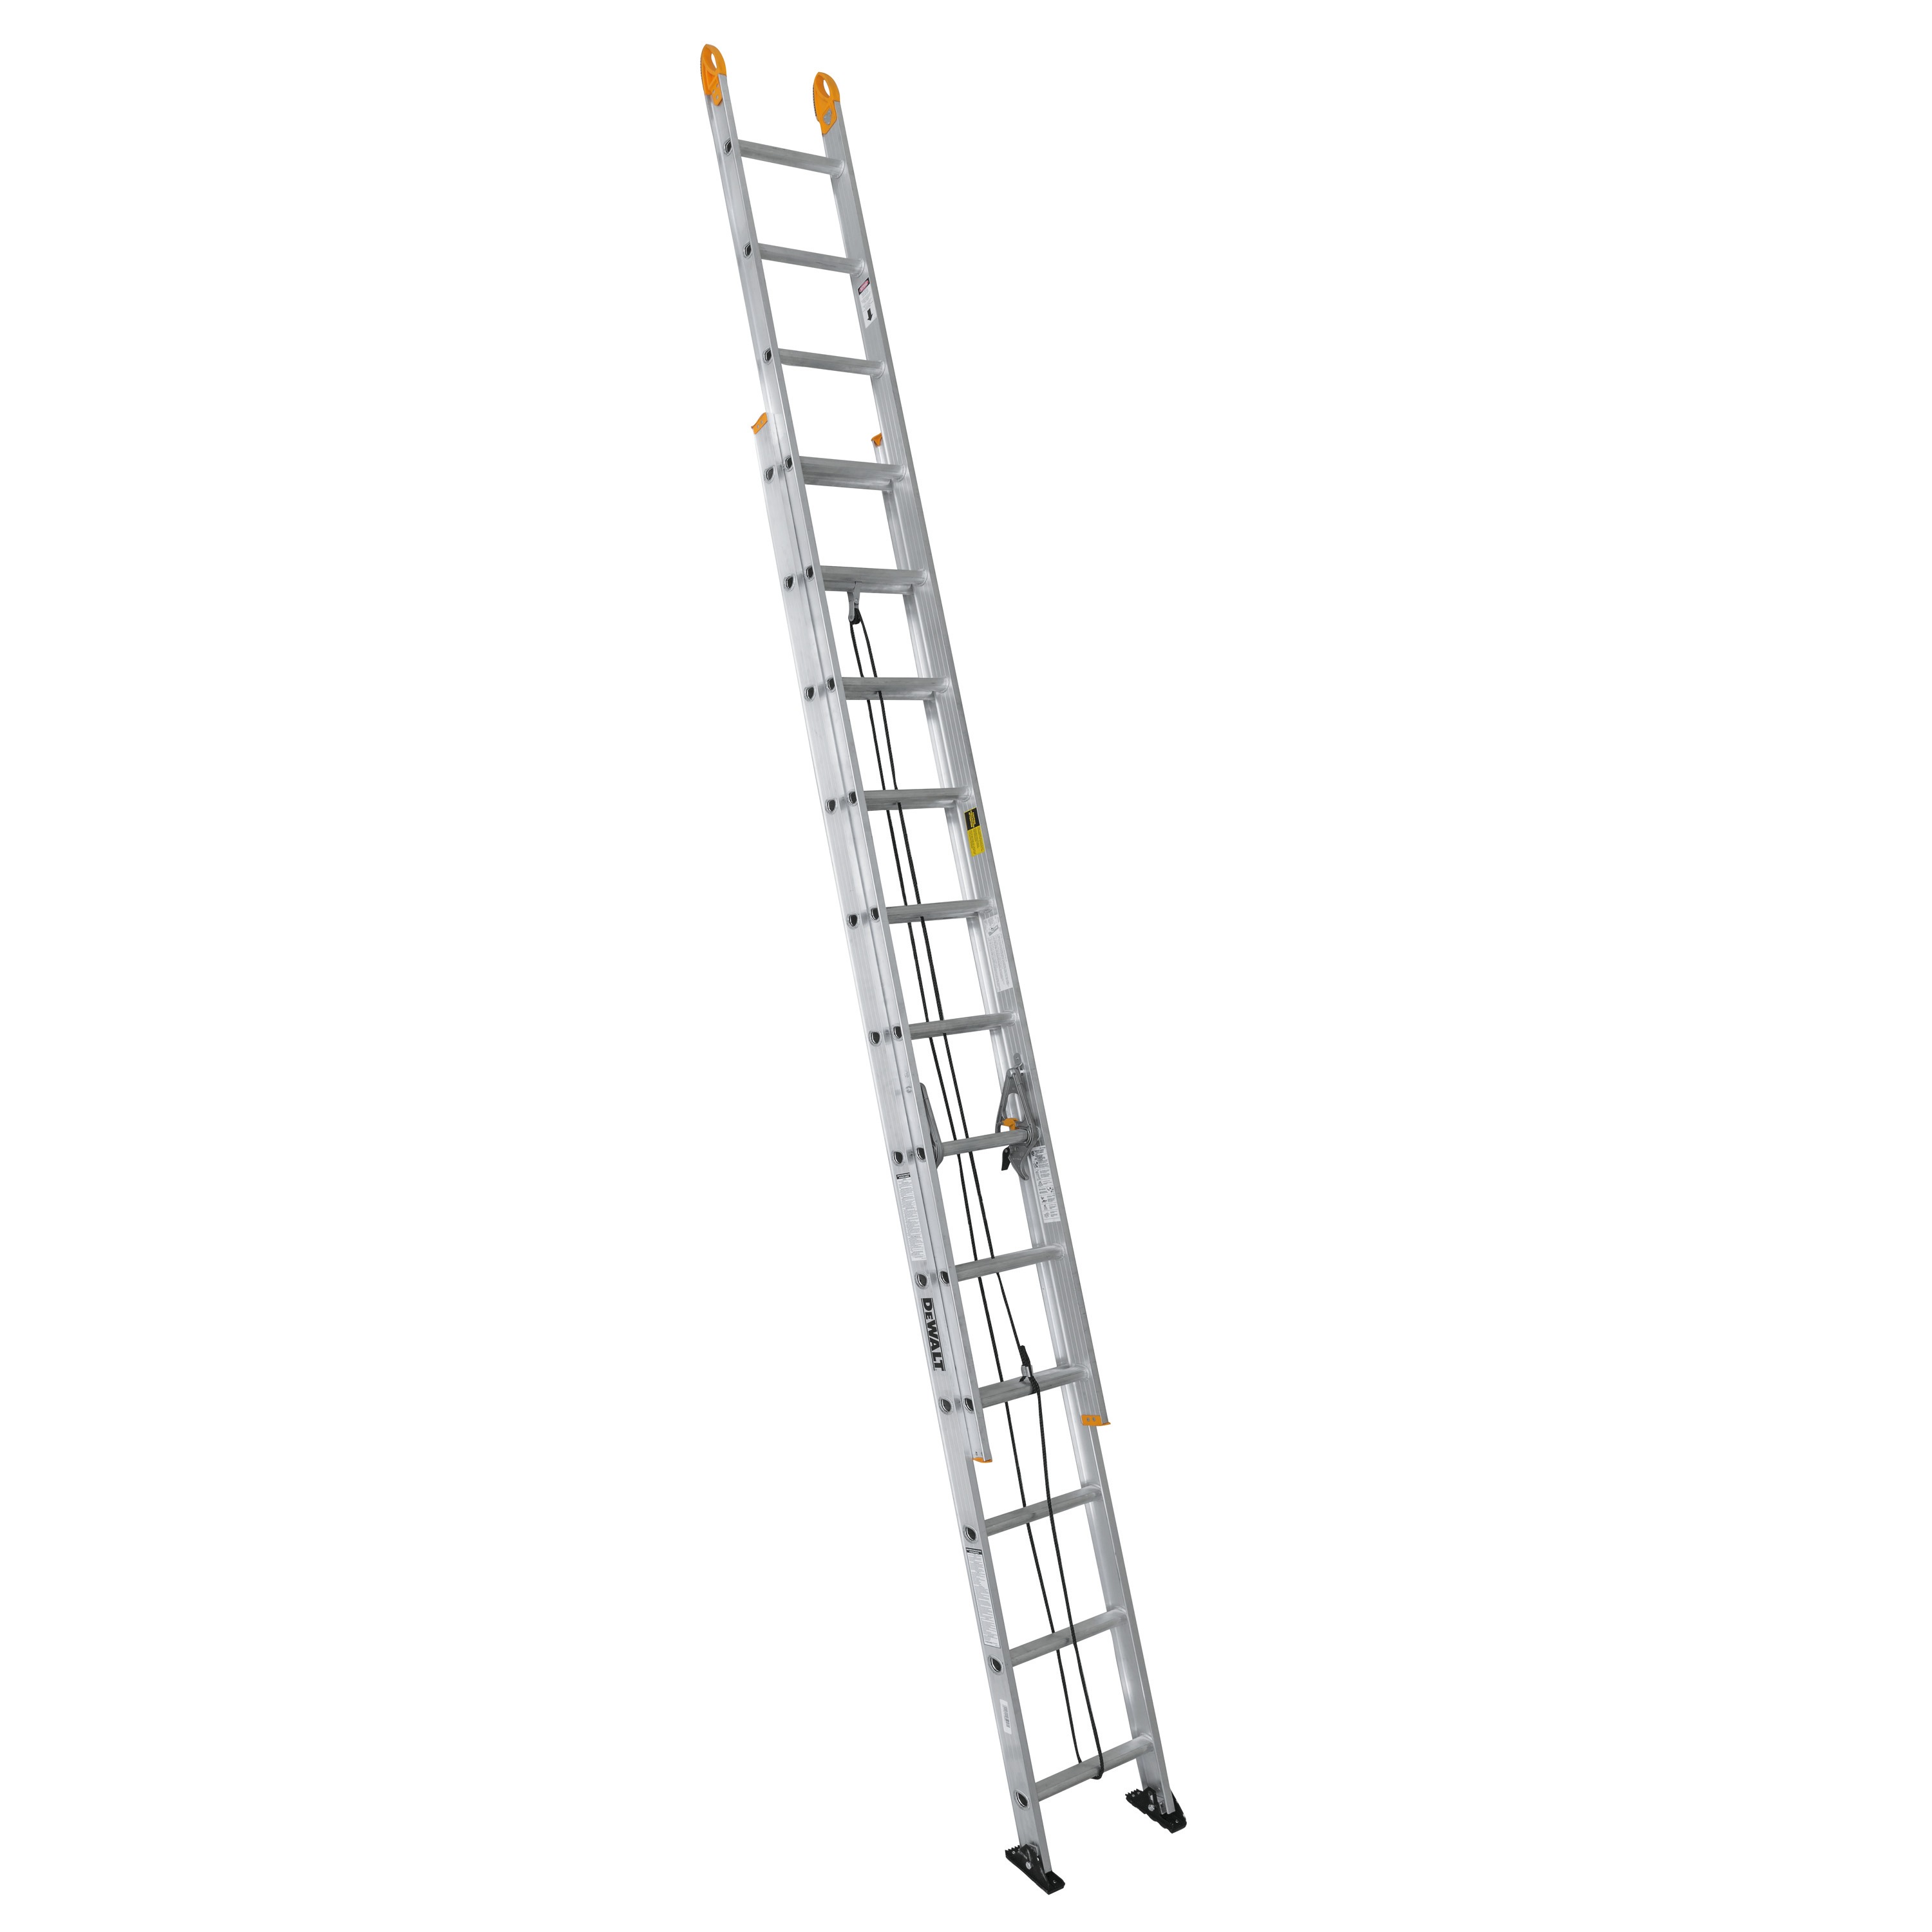 24 foot Aluminum 225 pound Type 2 Extension Ladder.